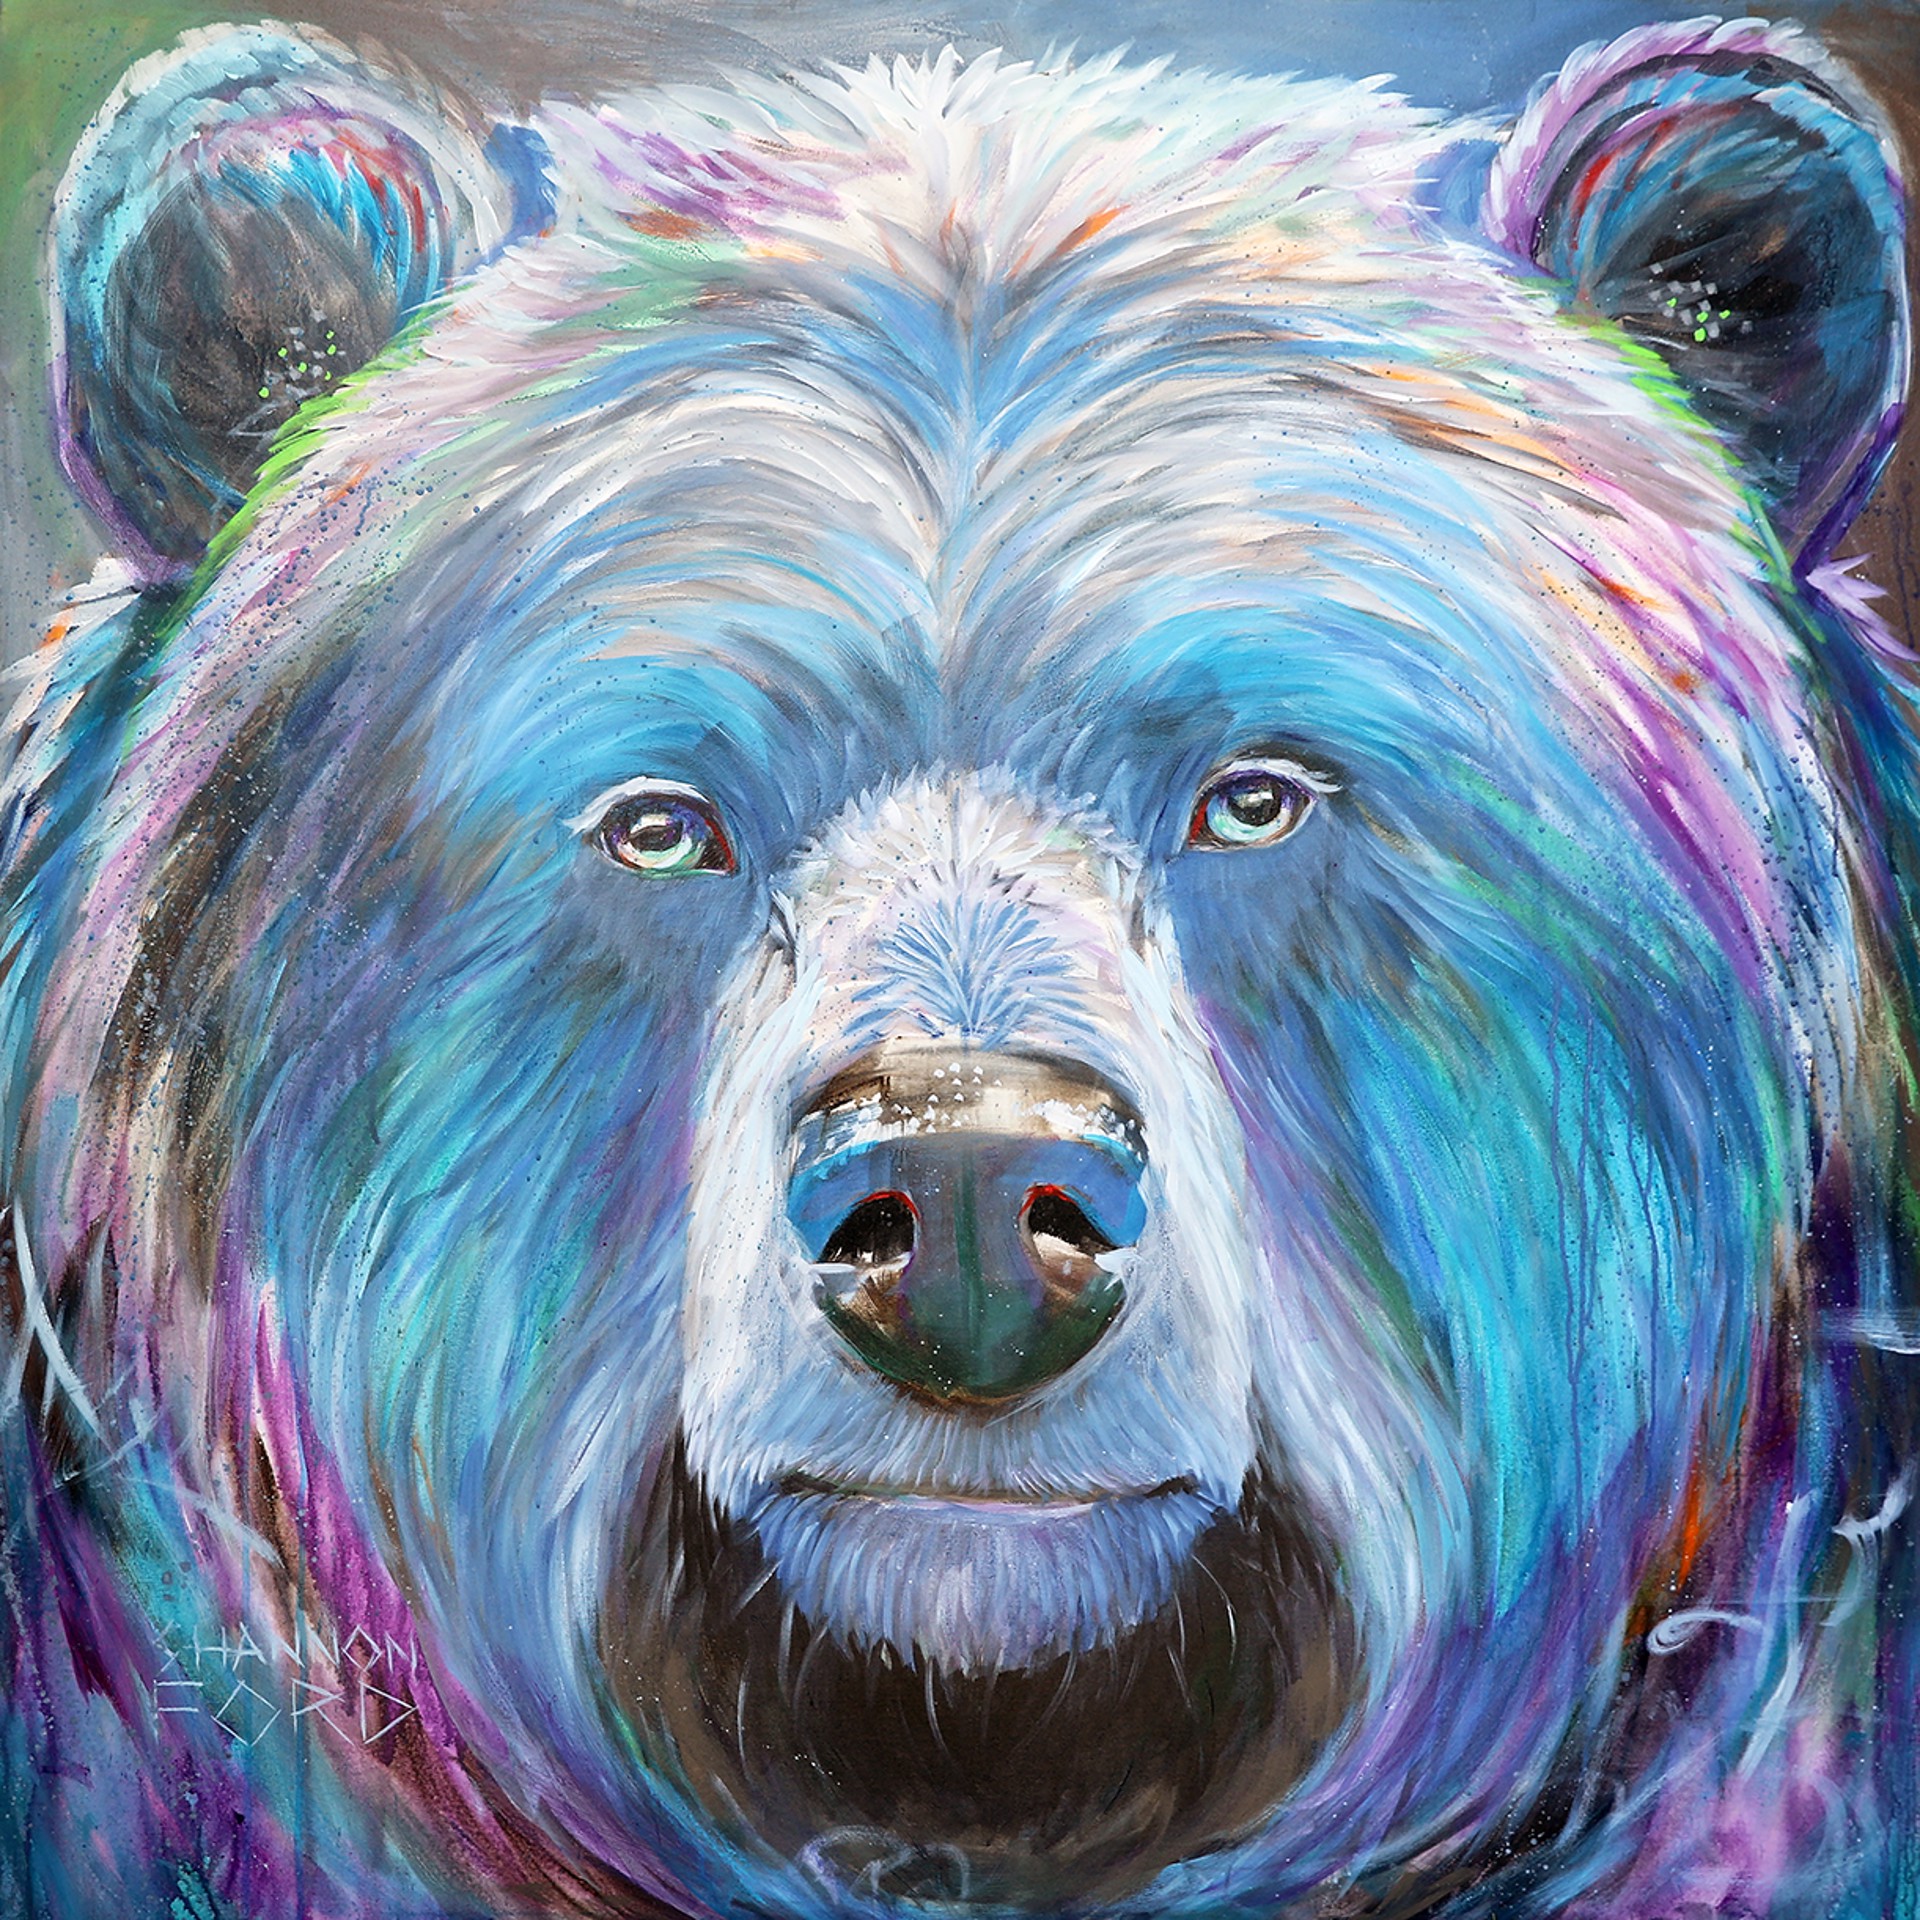 Blue Blue Bear by Shannon Ford